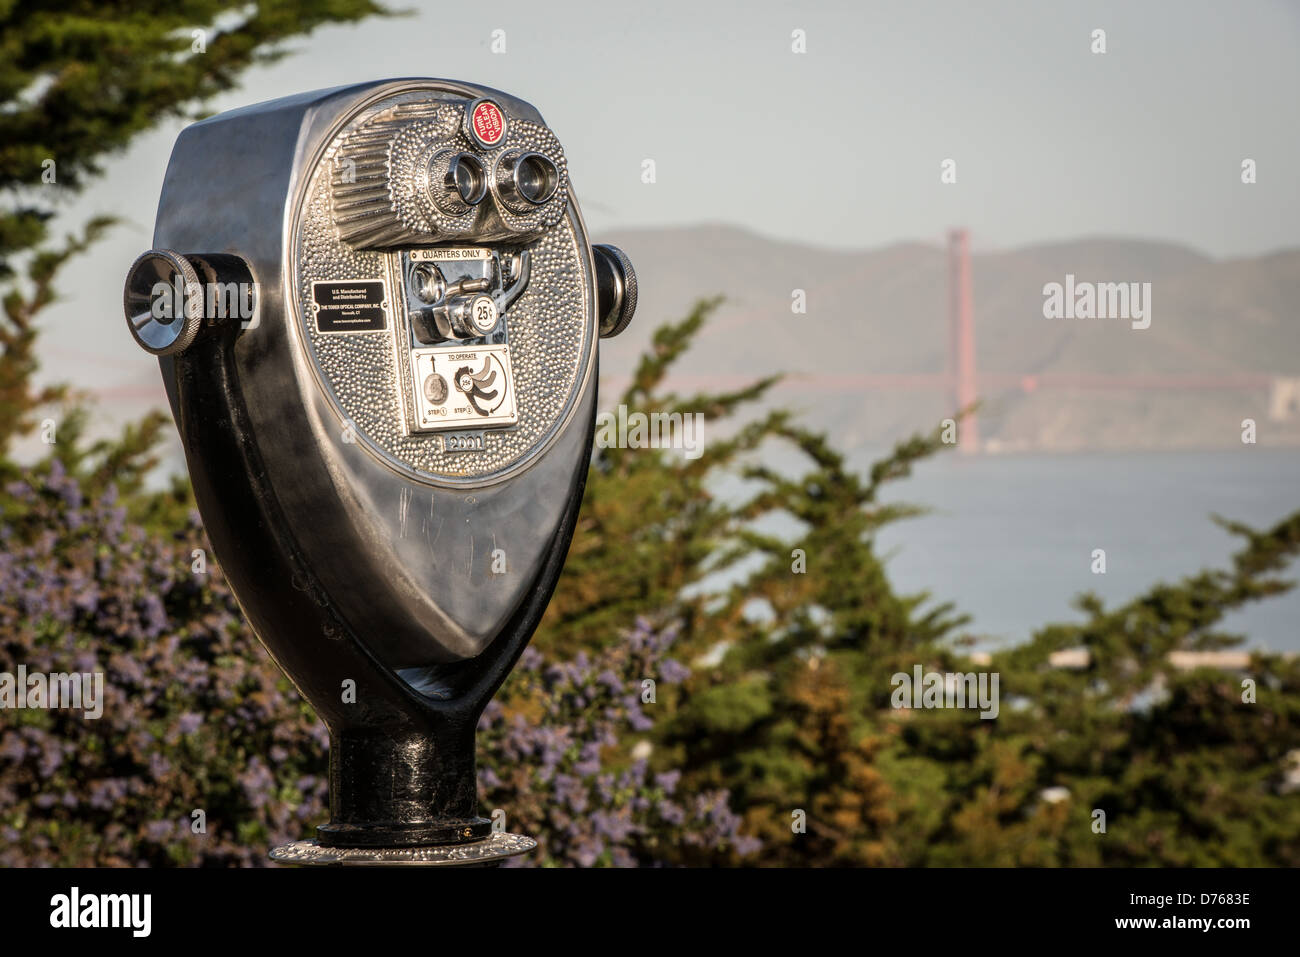 SAN FRANCISCO, California - Lookout binoculars, with the Golden Gate Bridge in the background, as seen from Coit Tower on top of Telegraph Hill in San Francisco, California. The tower was built in 1933 from funds bequeathed by Lillie Hitchcocl Coit. Stock Photo